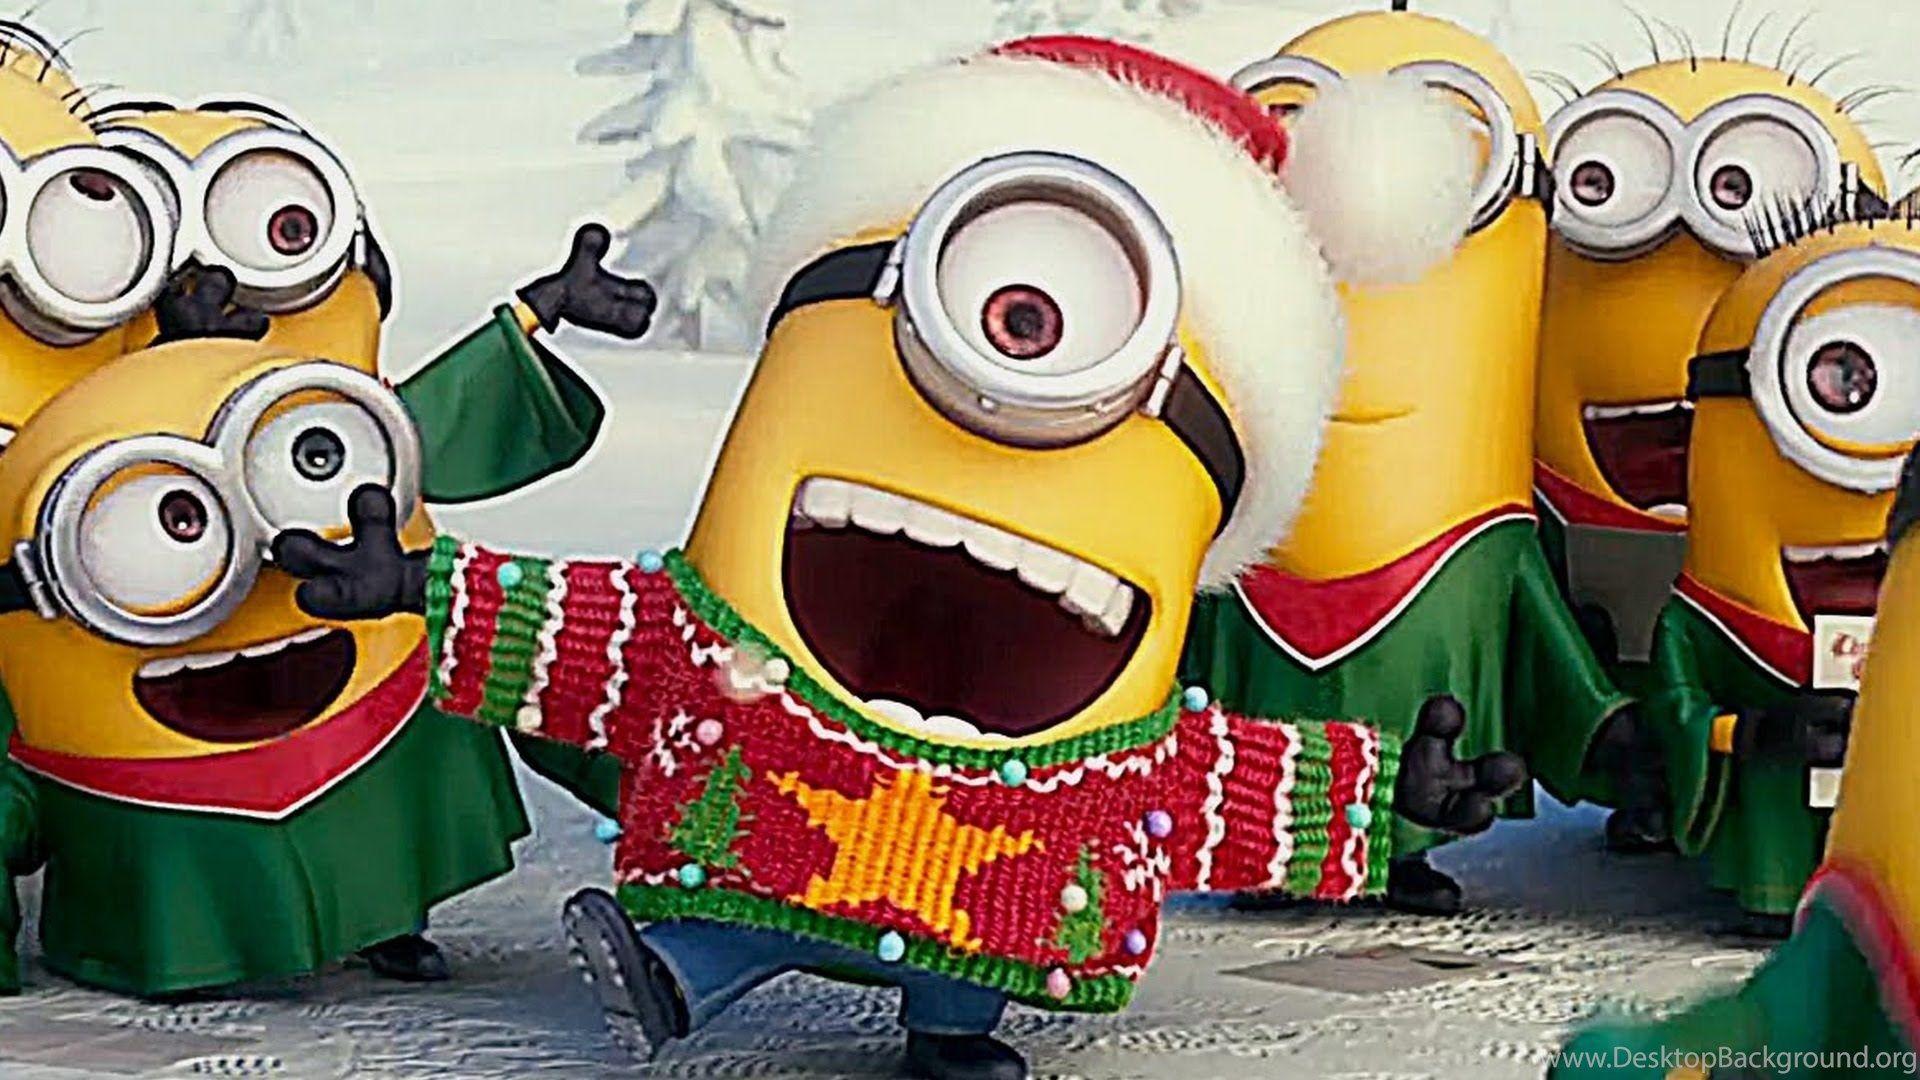 A Singer Minion with His Hand Raised with Christmas Decoration on Background  Editorial Photo  Image of singer minion 203811556